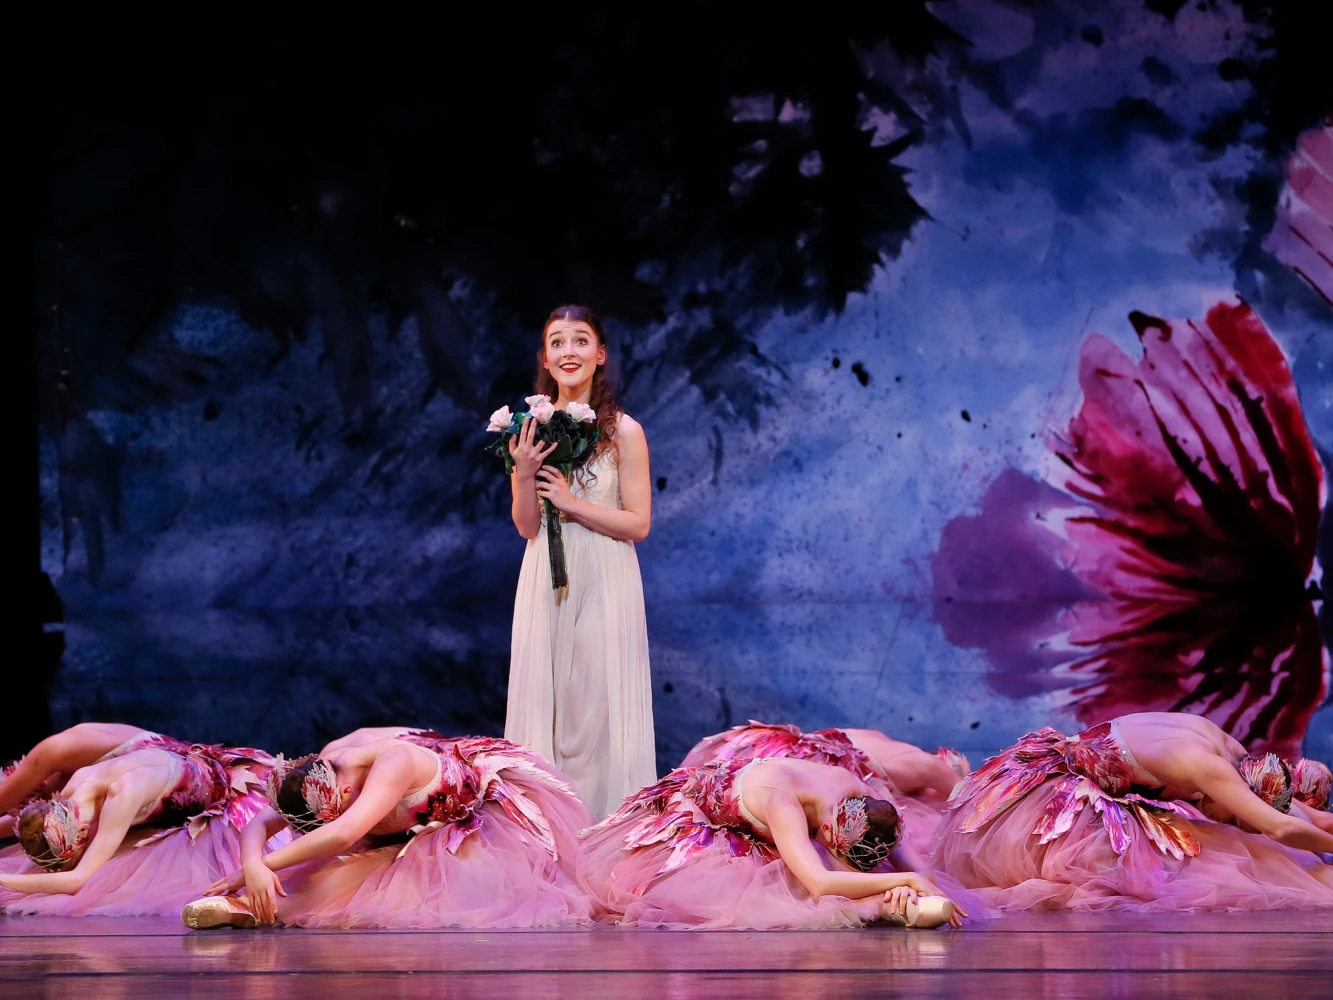 The Australian Ballet presents The Nutcracker: What to expect - 5